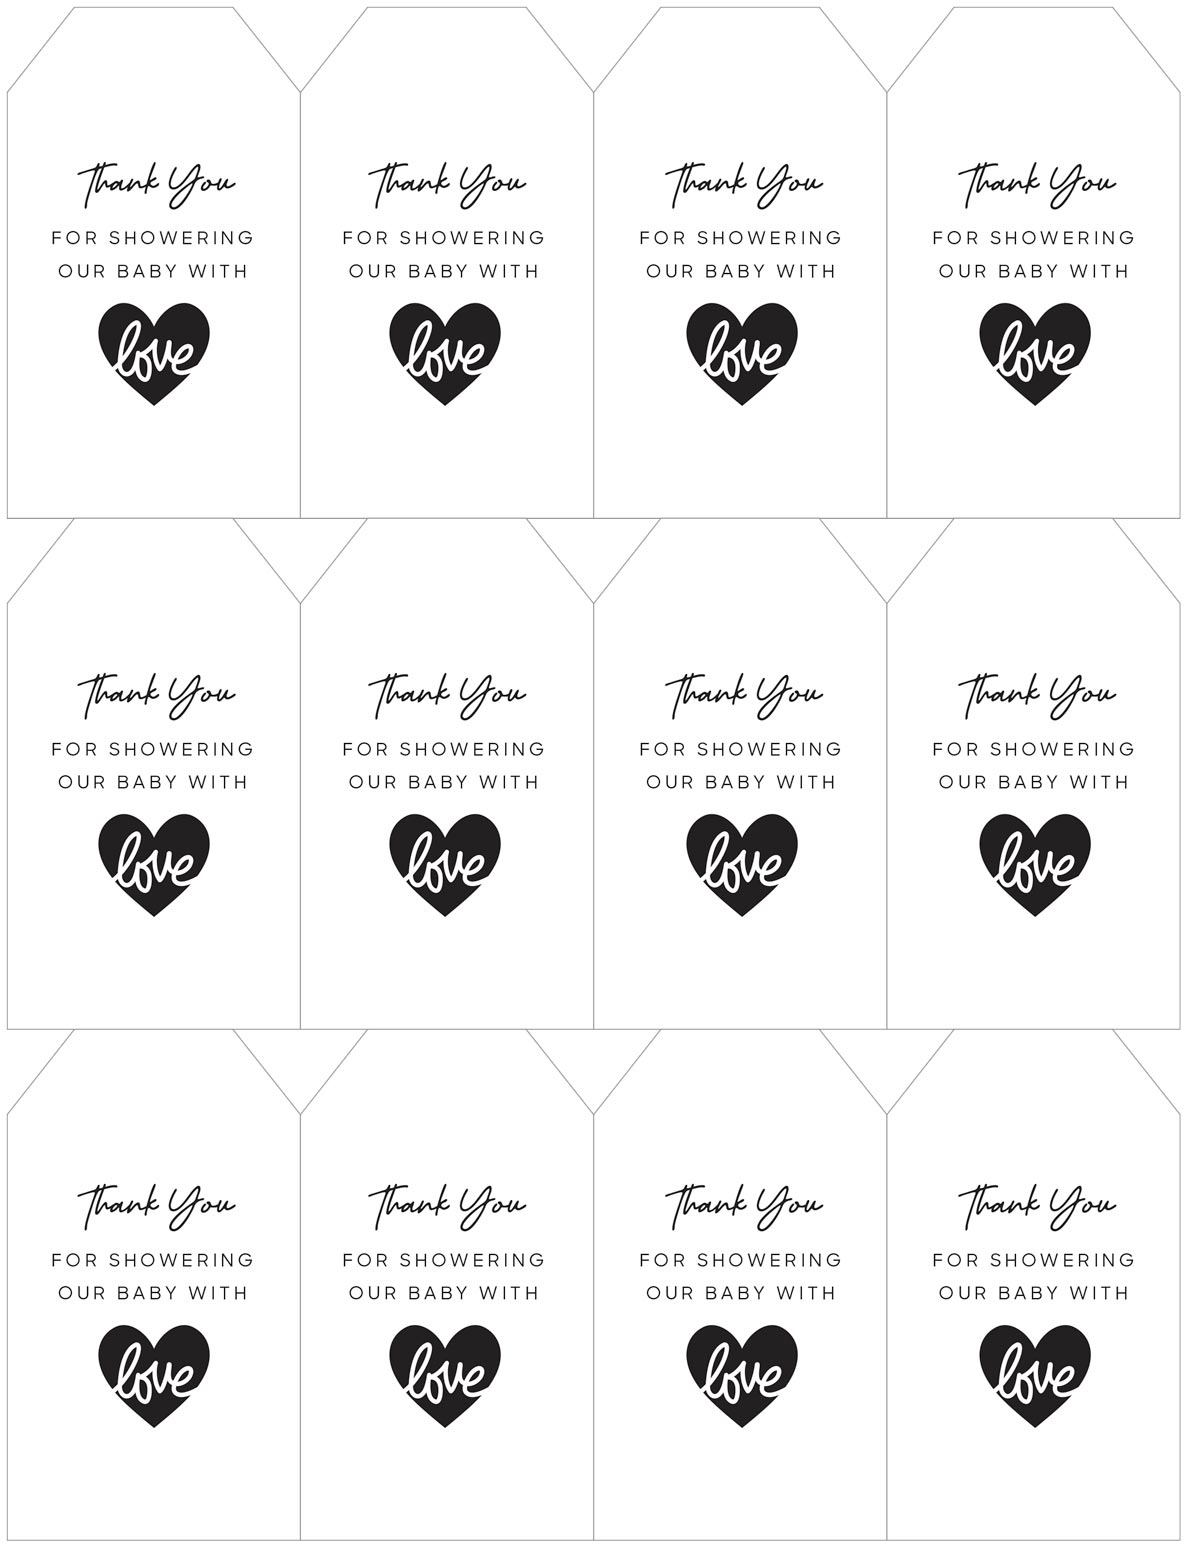 Charming Baby Shower Favor Tags: Free Printable For Your Thank You within Free Printable Baby Shower Favor Tags